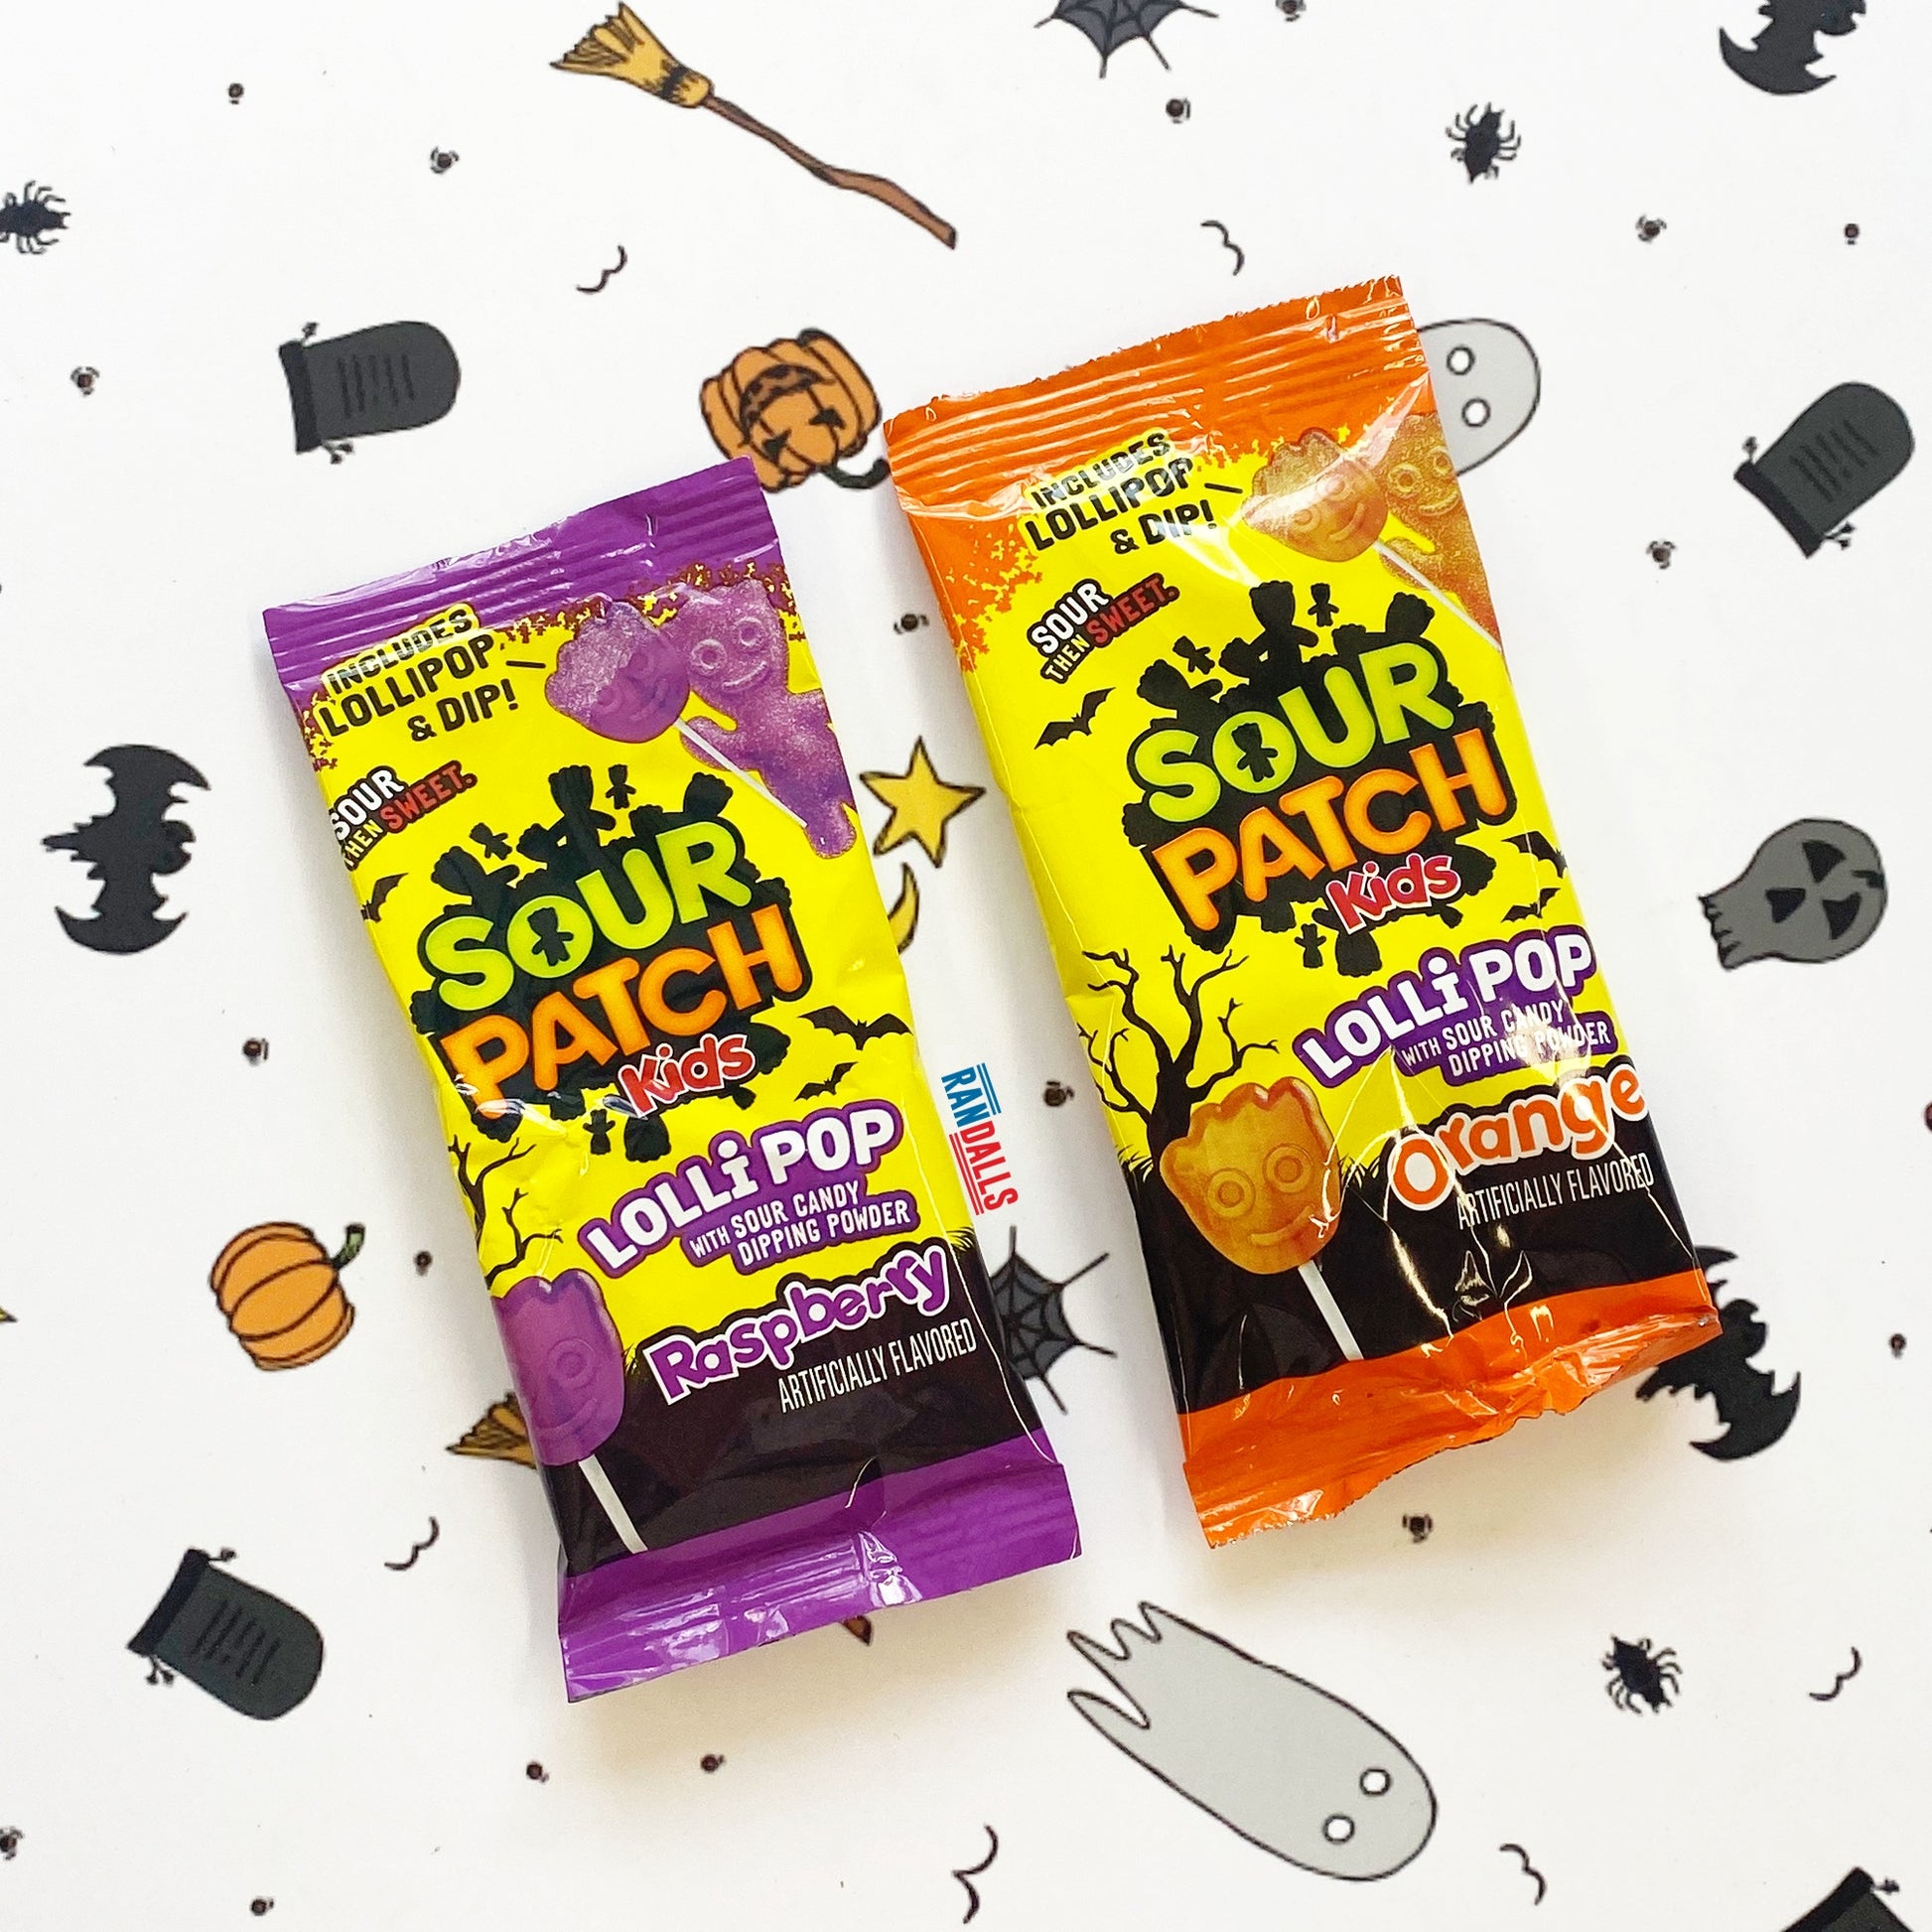 sour patch kids, lollipop with sour candy dipping powder, each pack includes lollipop and dip, trick or treating, raspberry sour patch kids, orange sour patch kids, halloween candy, fall candy, american candy, american halloween, candy, usa, randalls,